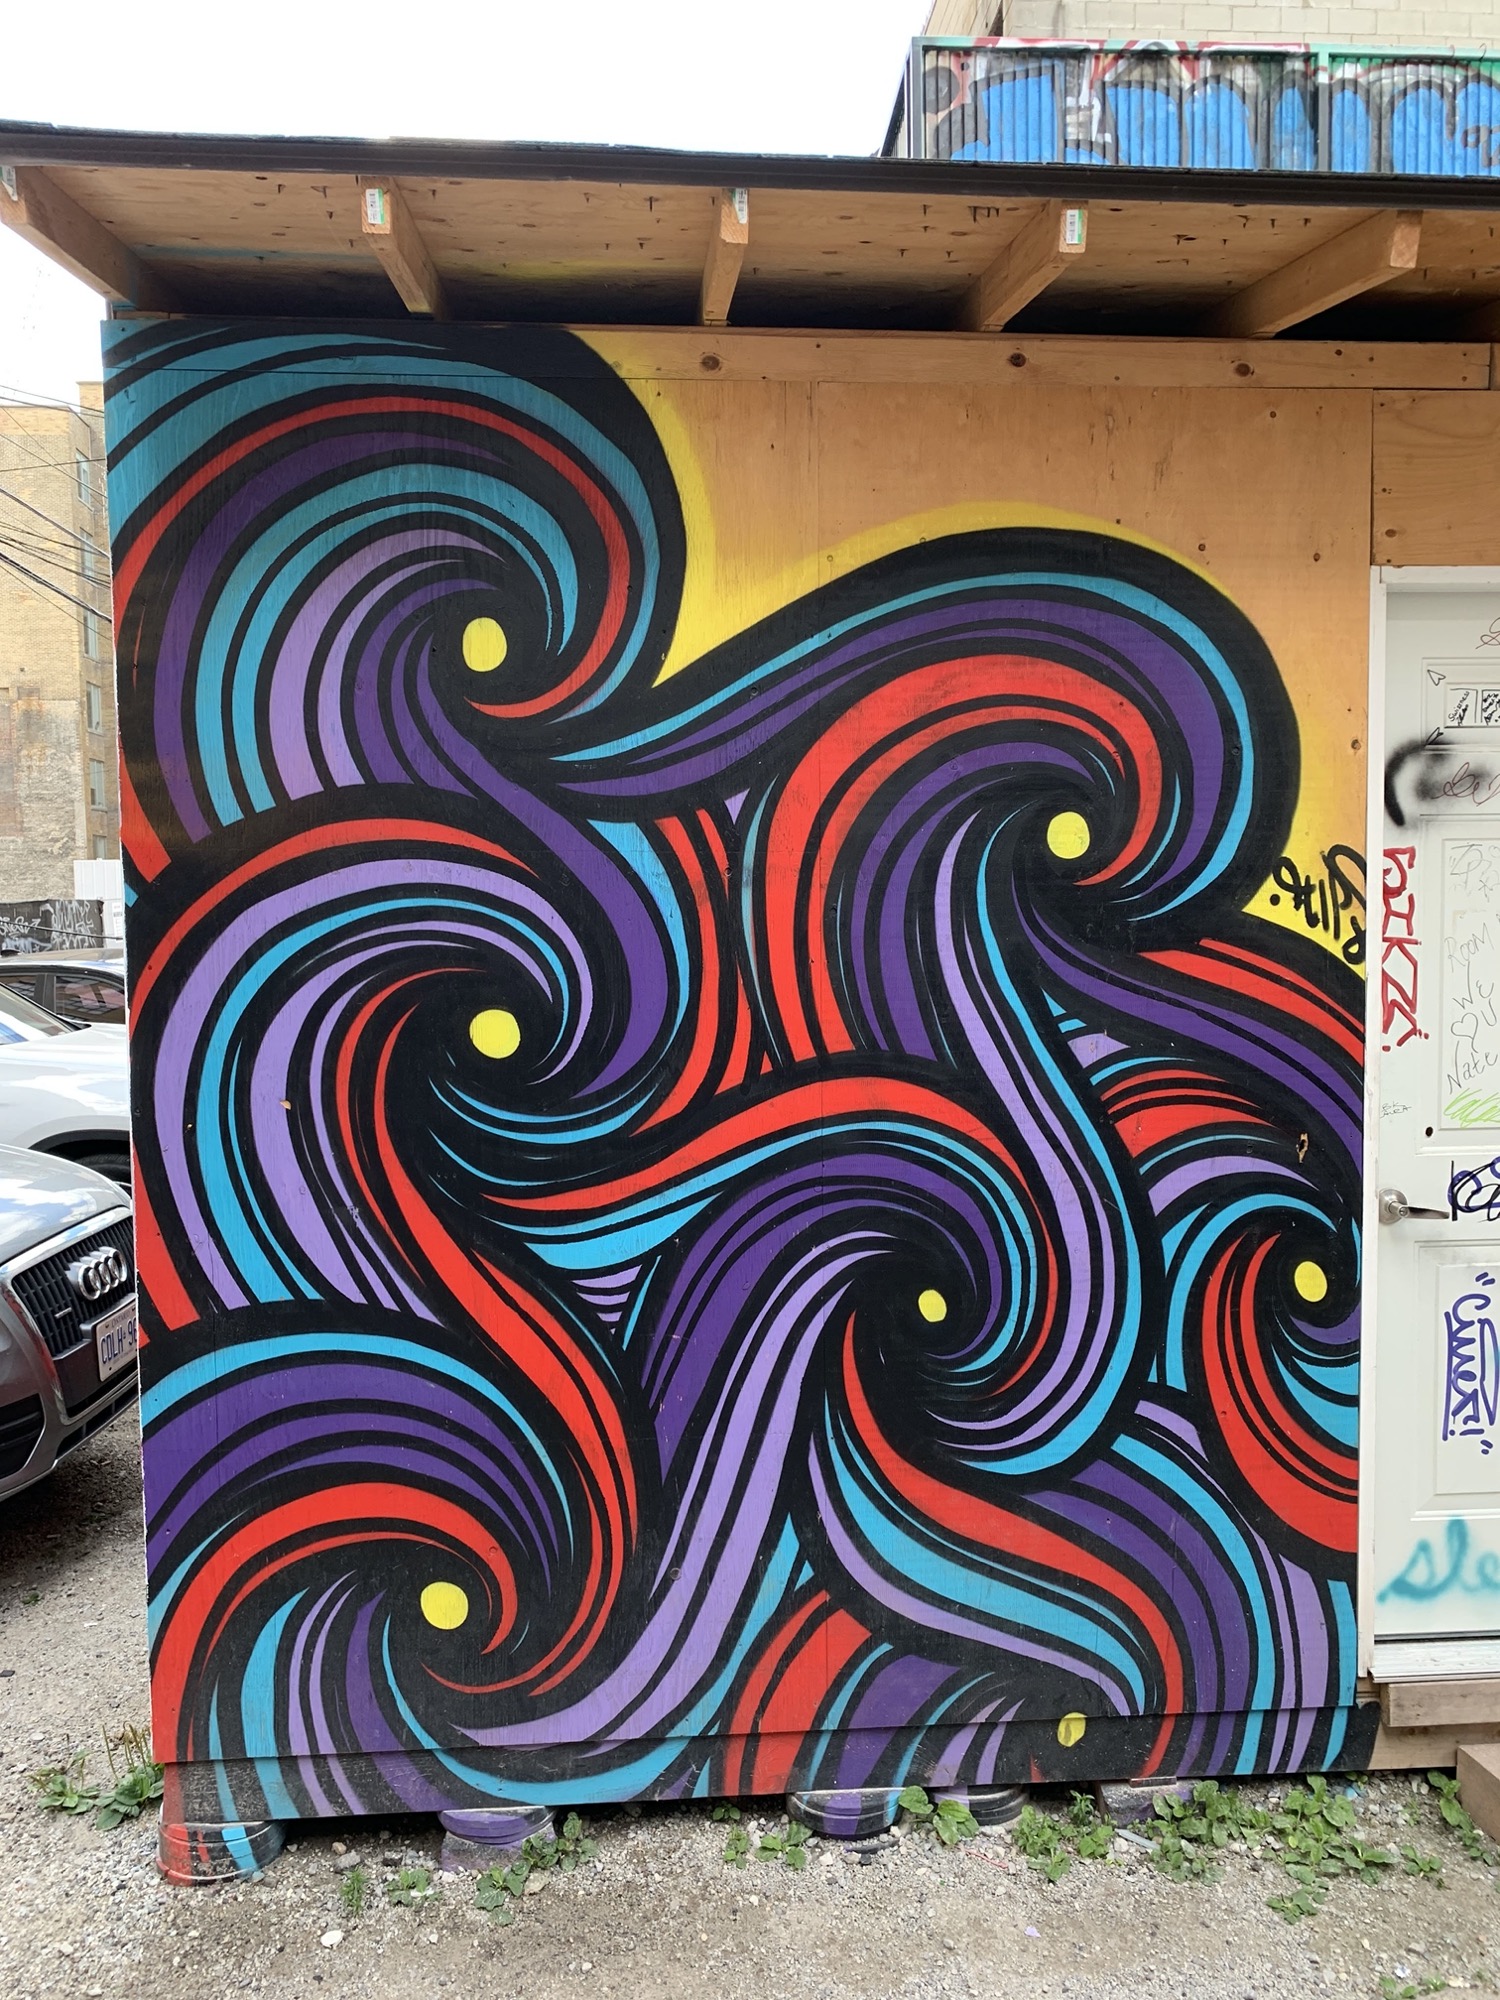 Graffiti 2586  captured by Rabot in Toronto Canada